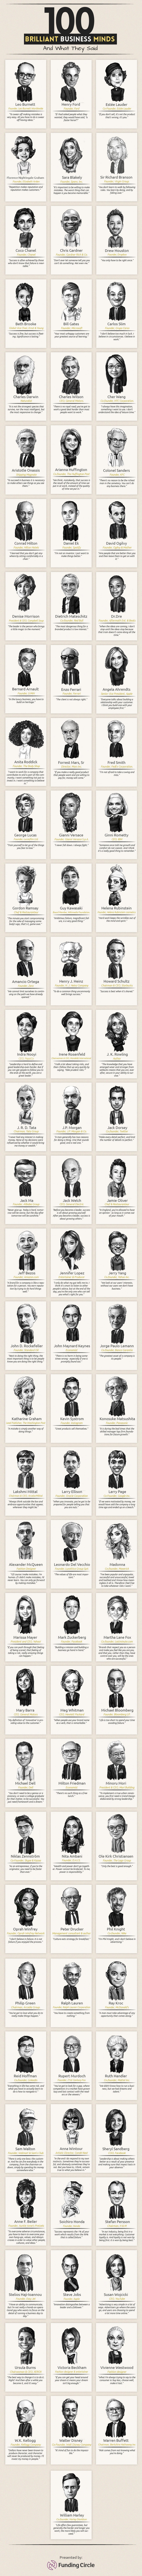 100 Brilliant Business Minds and What They Said